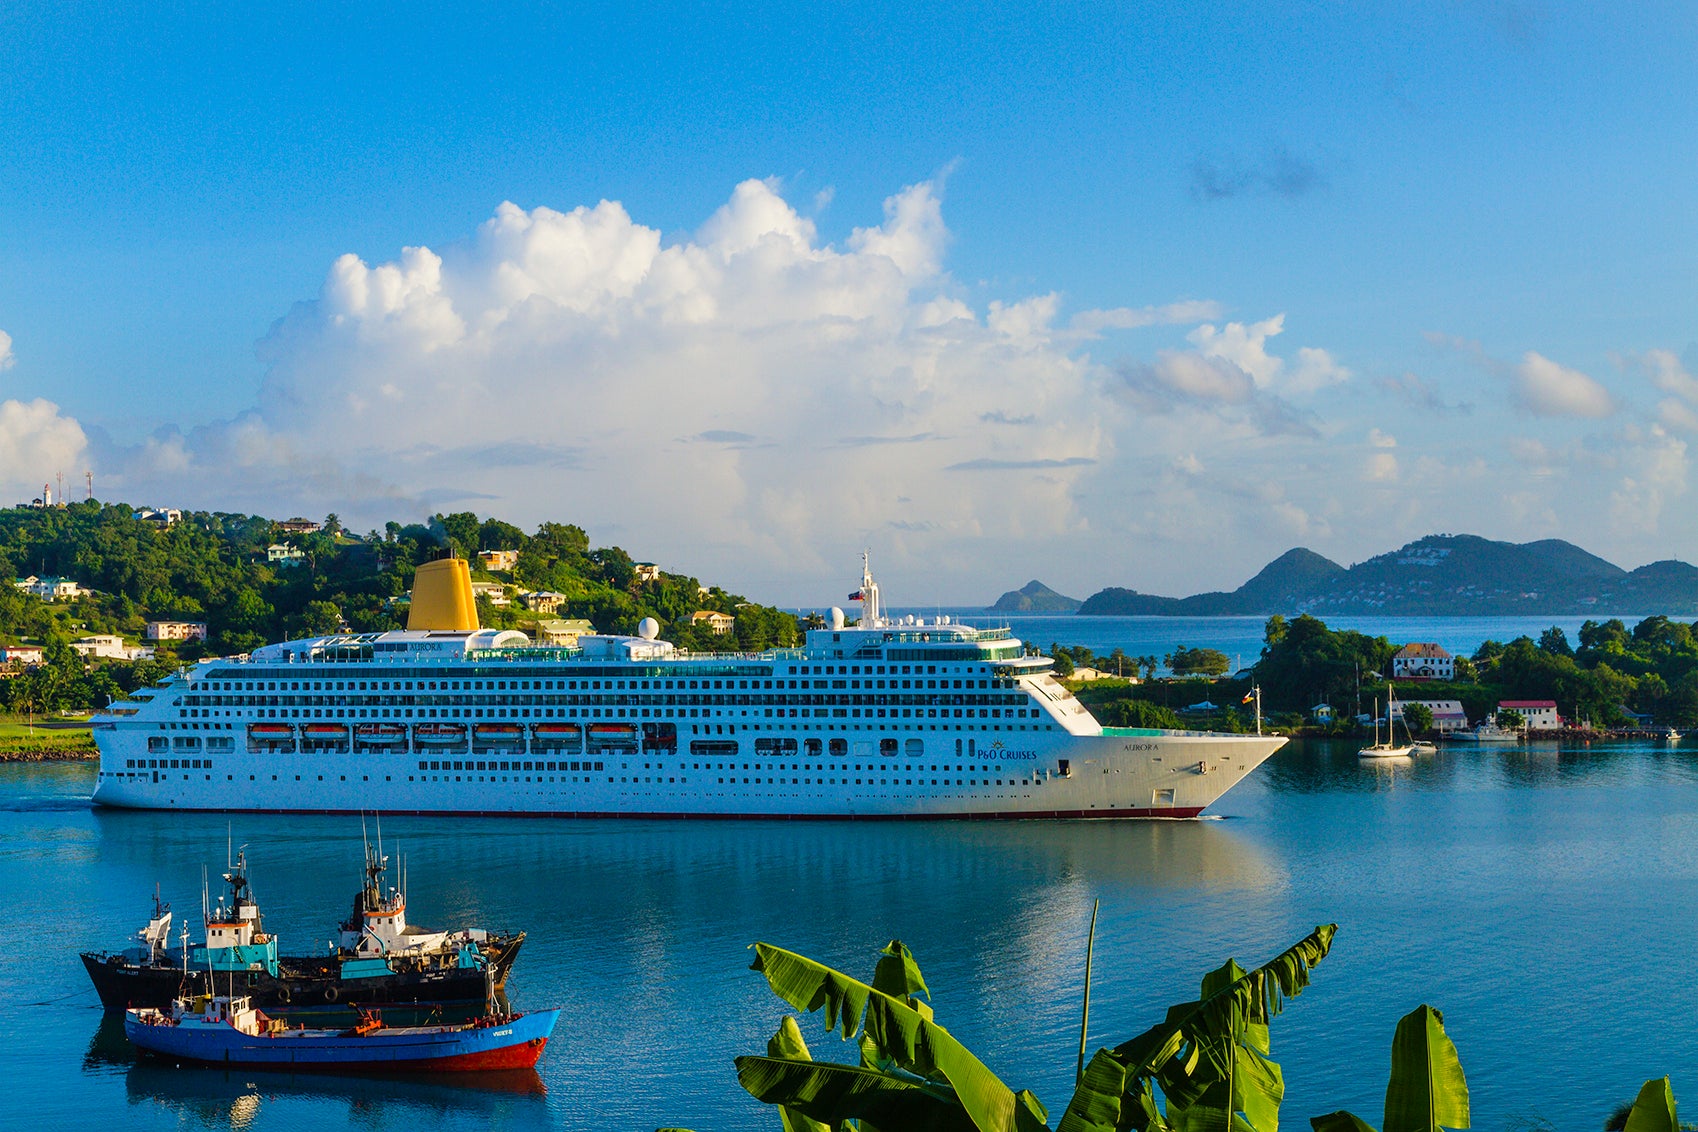 Travel to Tortola, Basseterre and Fort de France with P&O Cruises